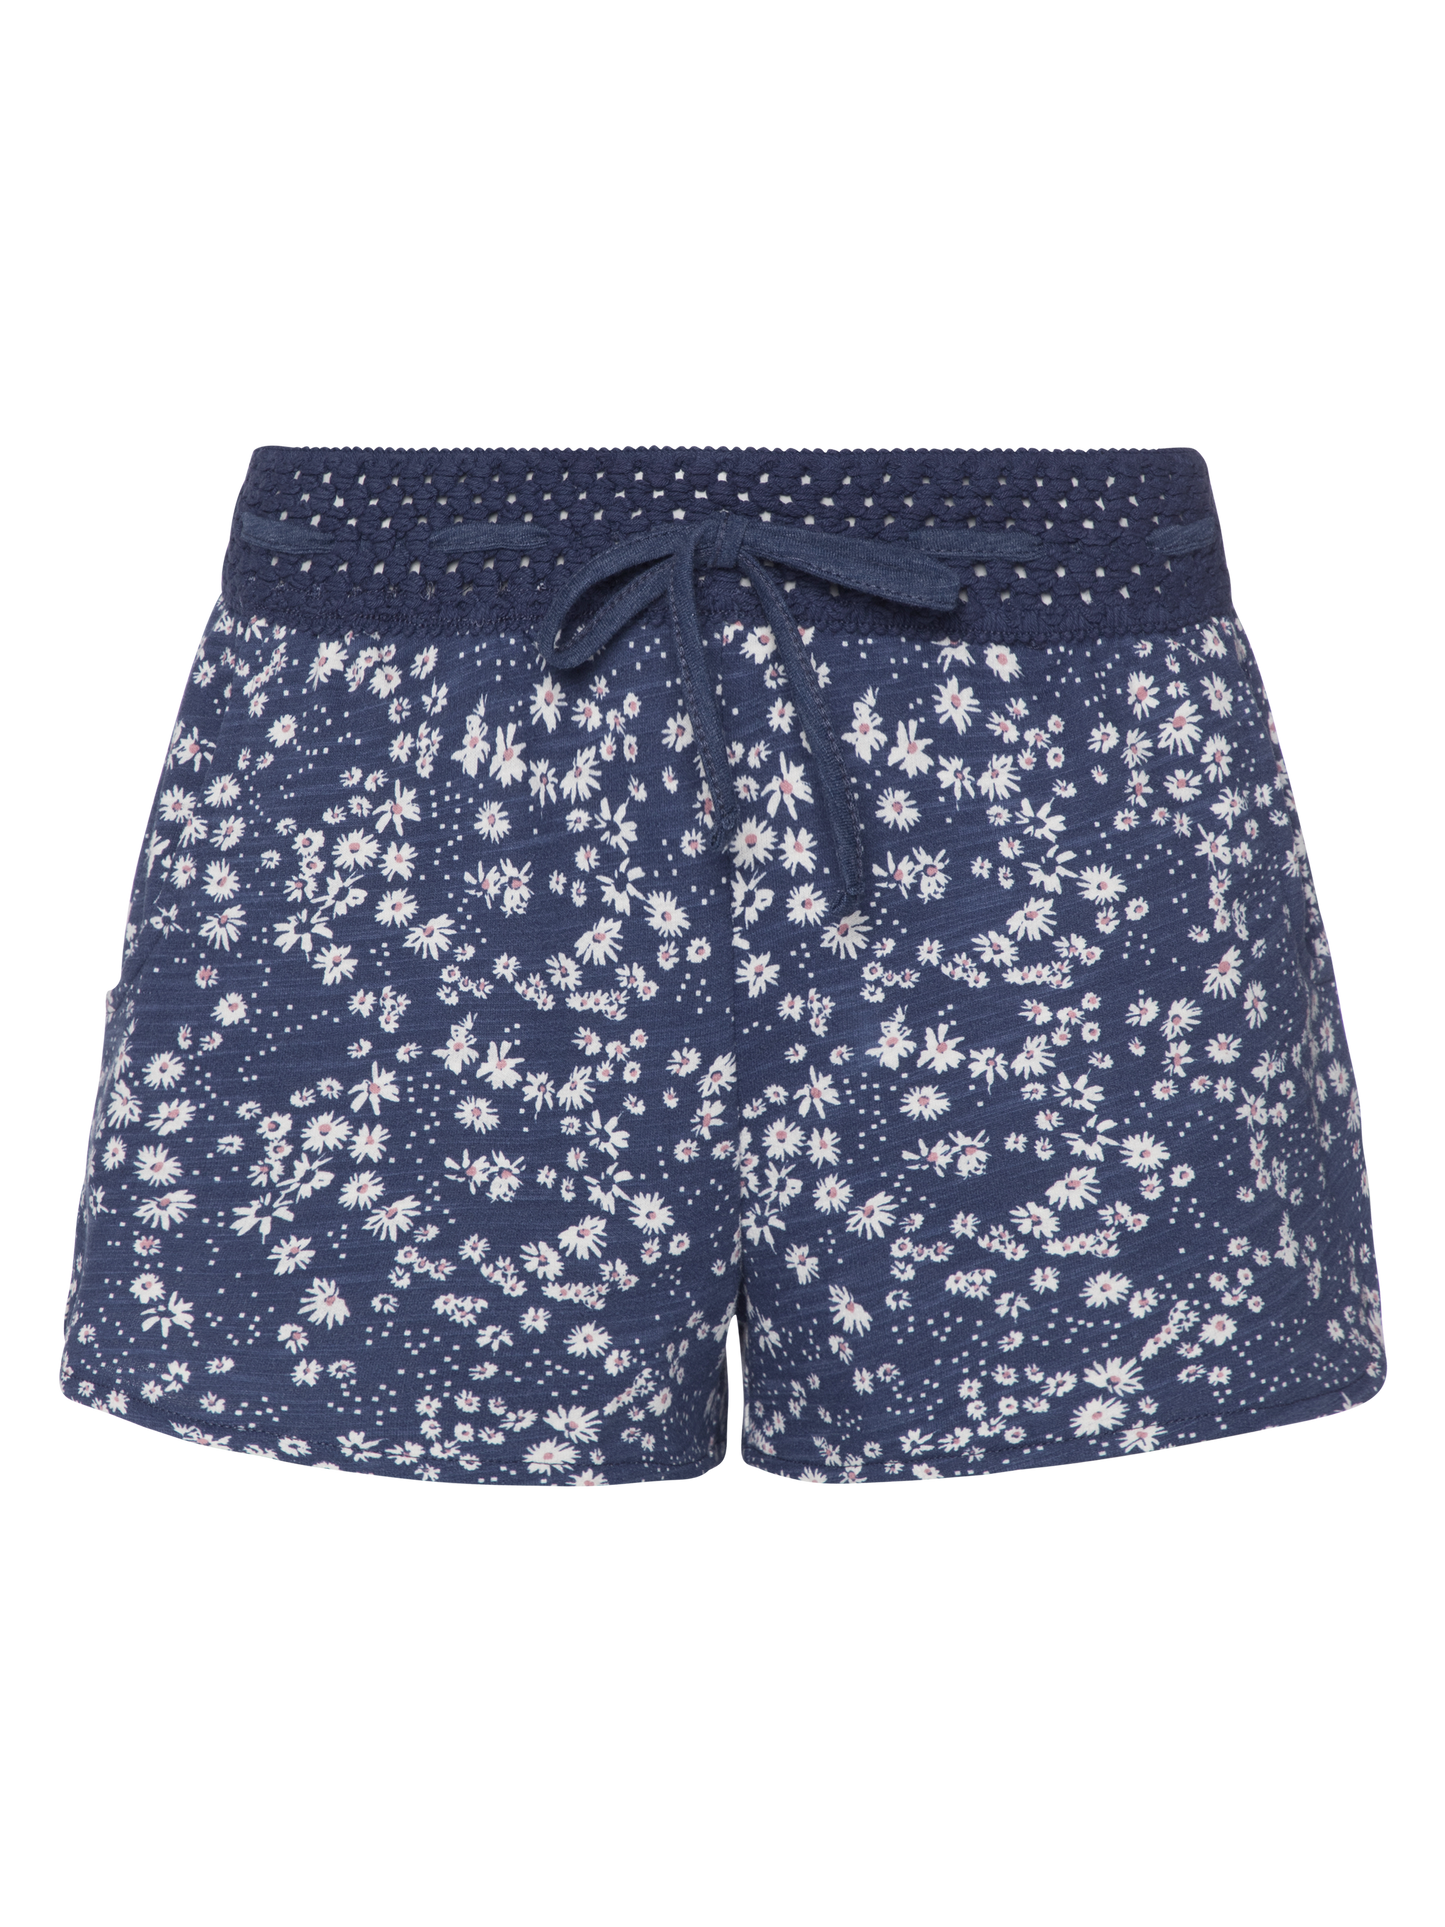 Protest Flowery Floral Shorts in Deep Sea Blue